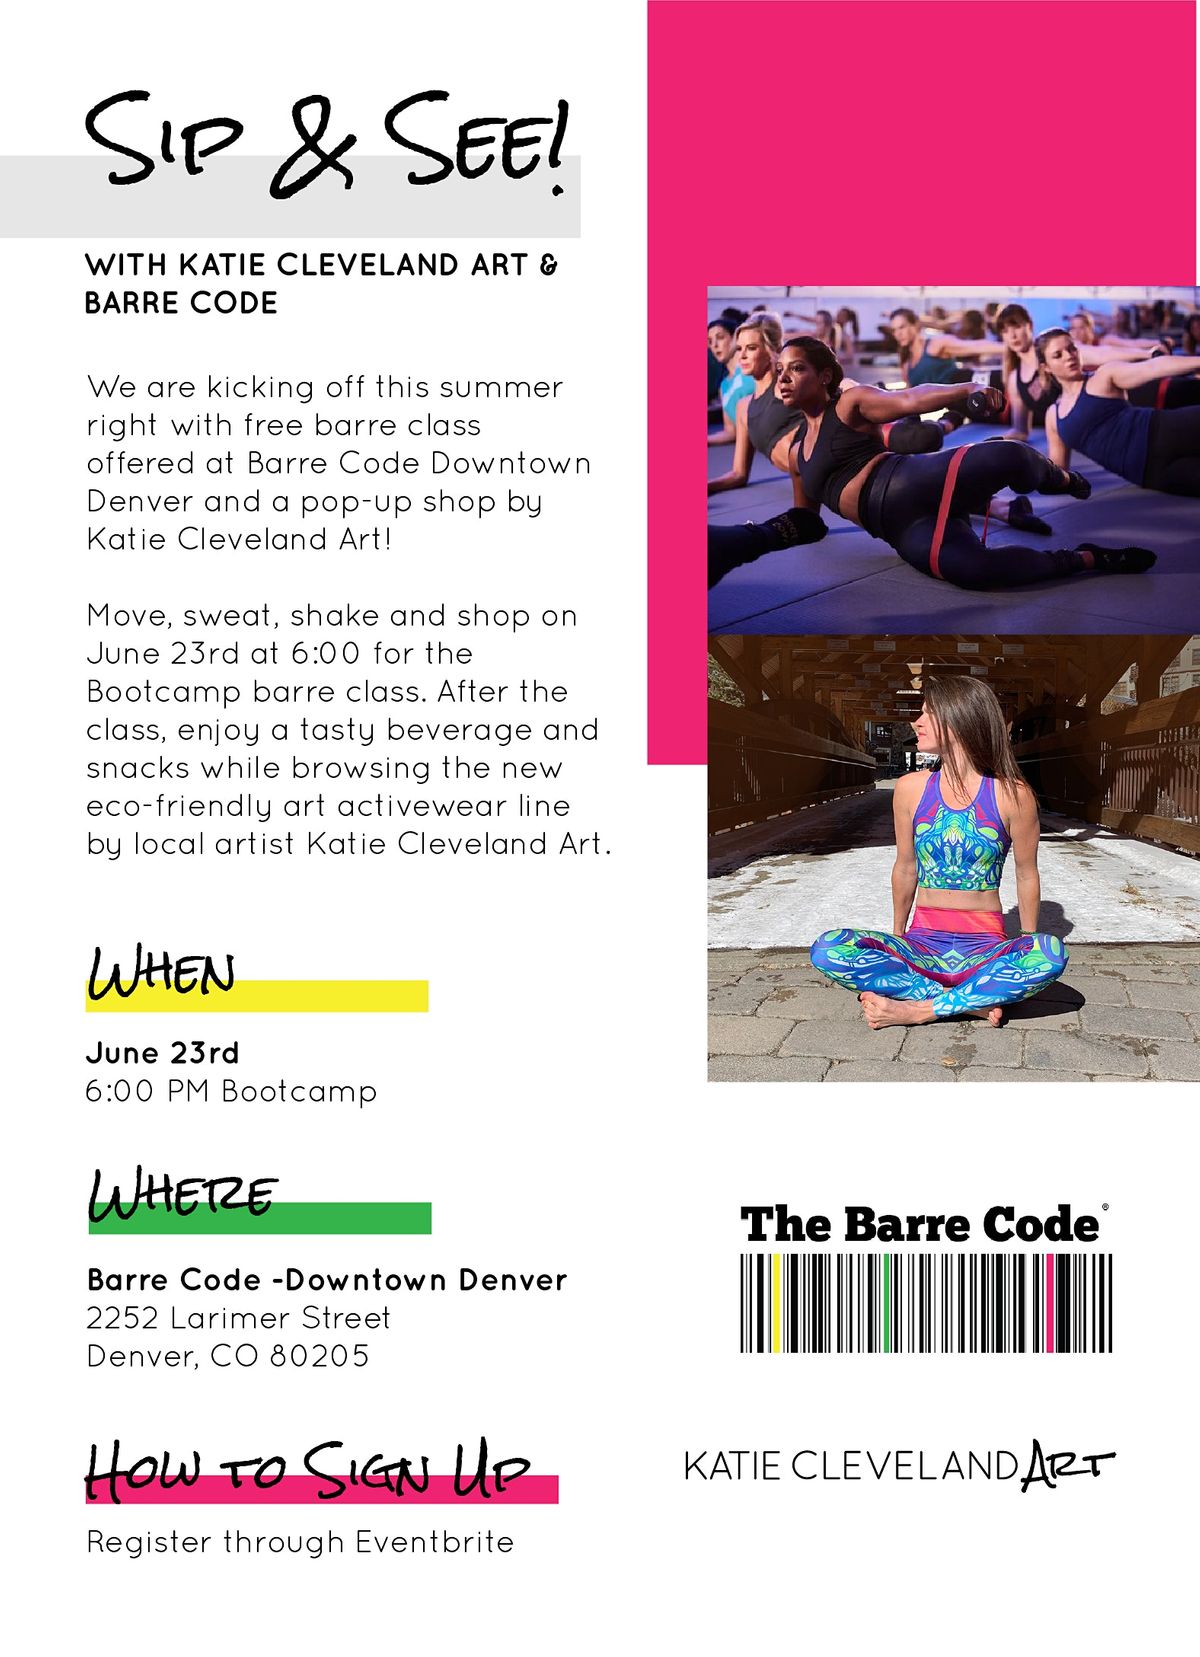 The Barre Code X Katie Cleveland Art Sip' n See!